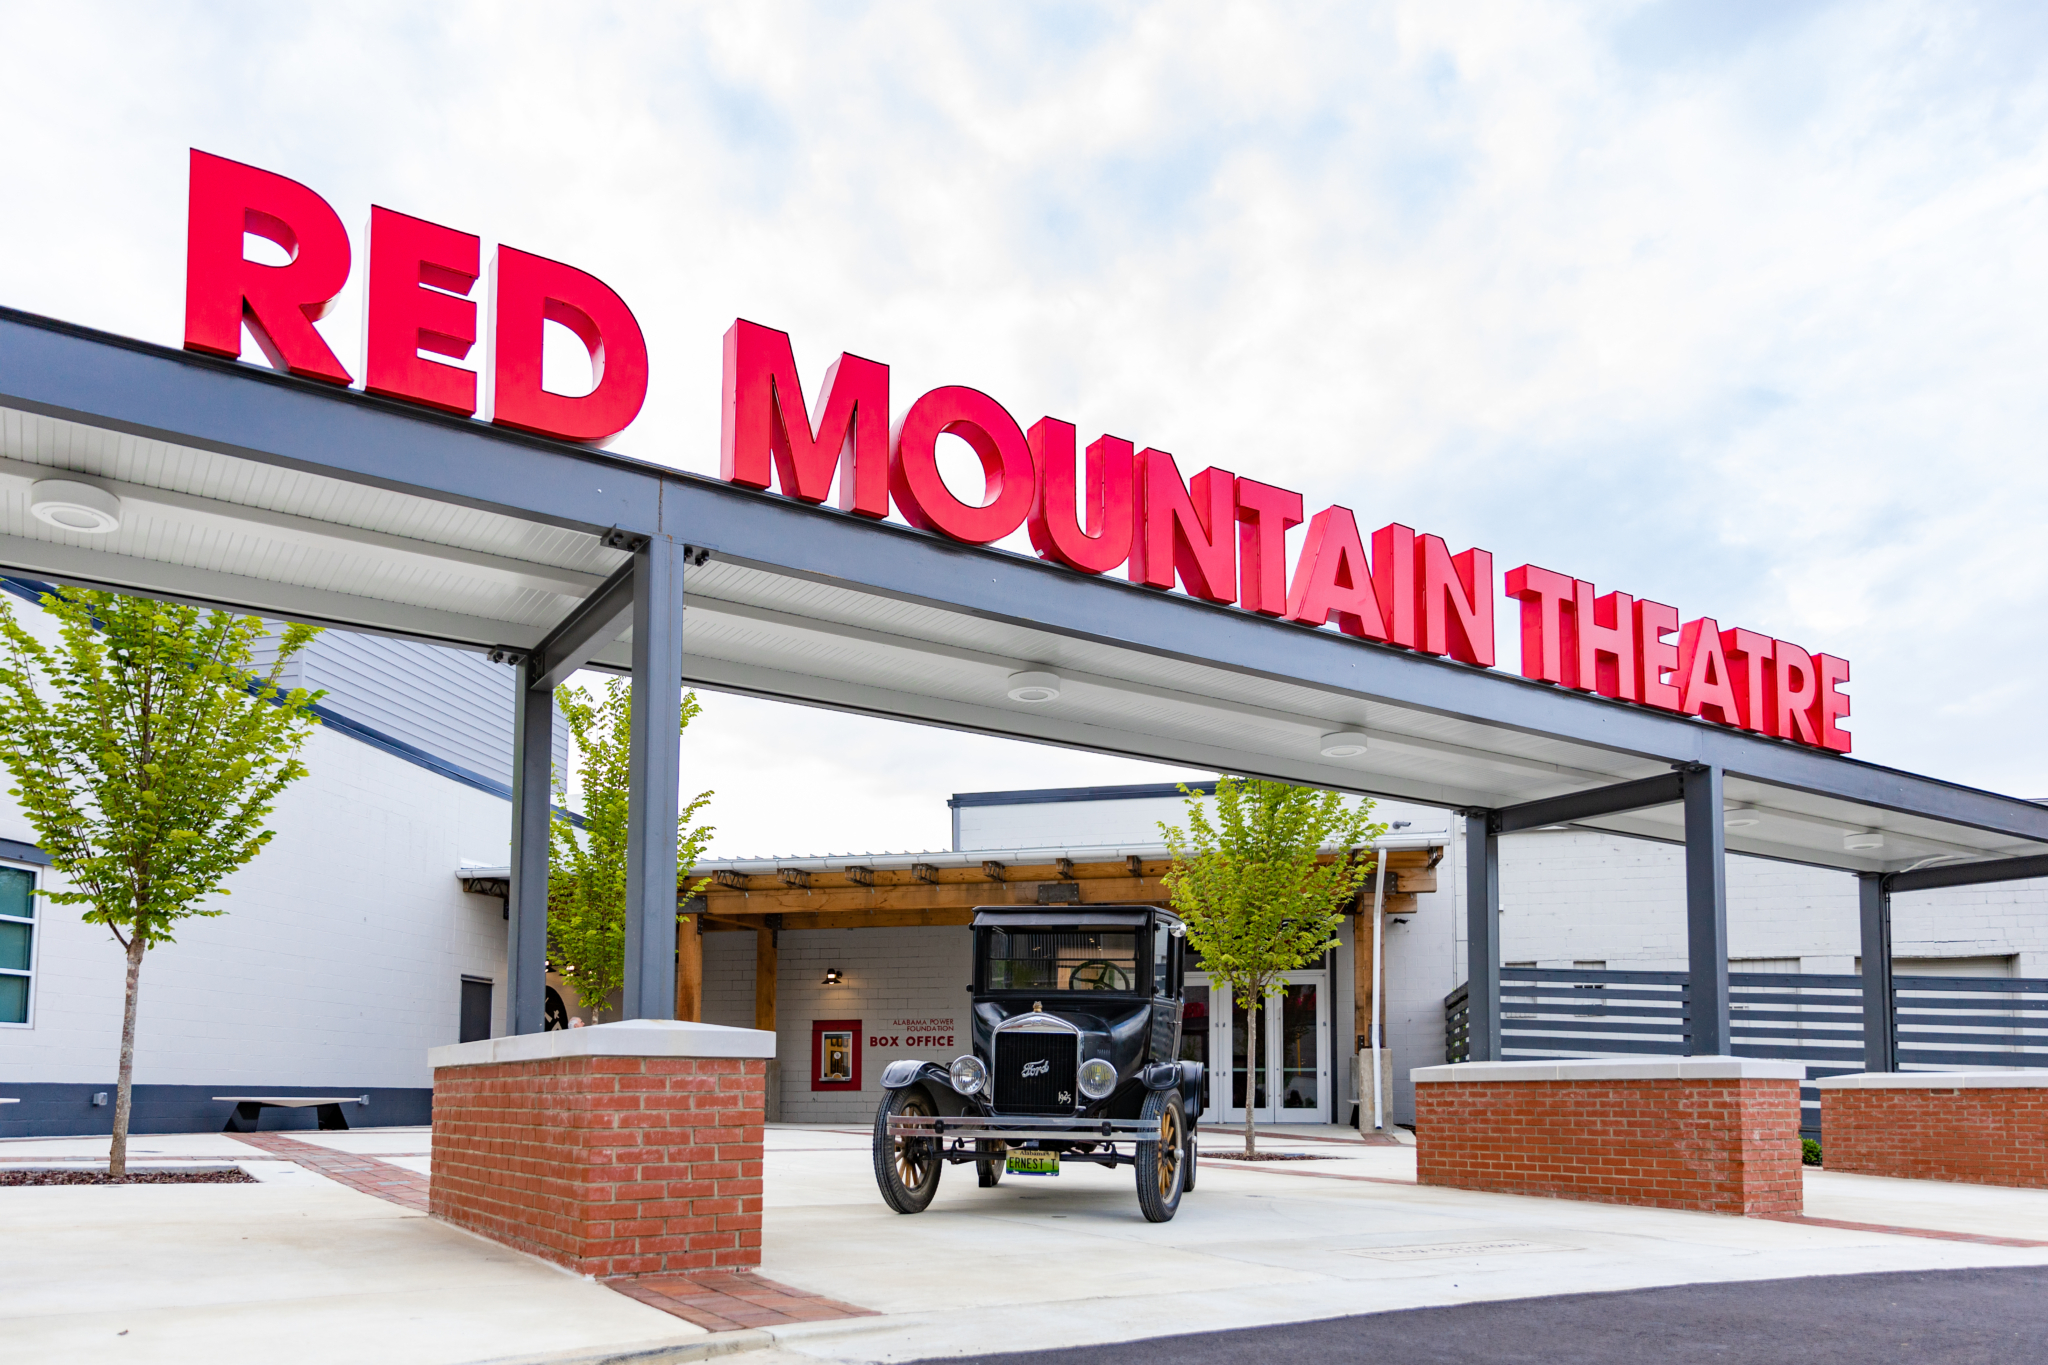 Red Mountain Theatre is the site of Techstars Alabama EnergyTech Demo Day